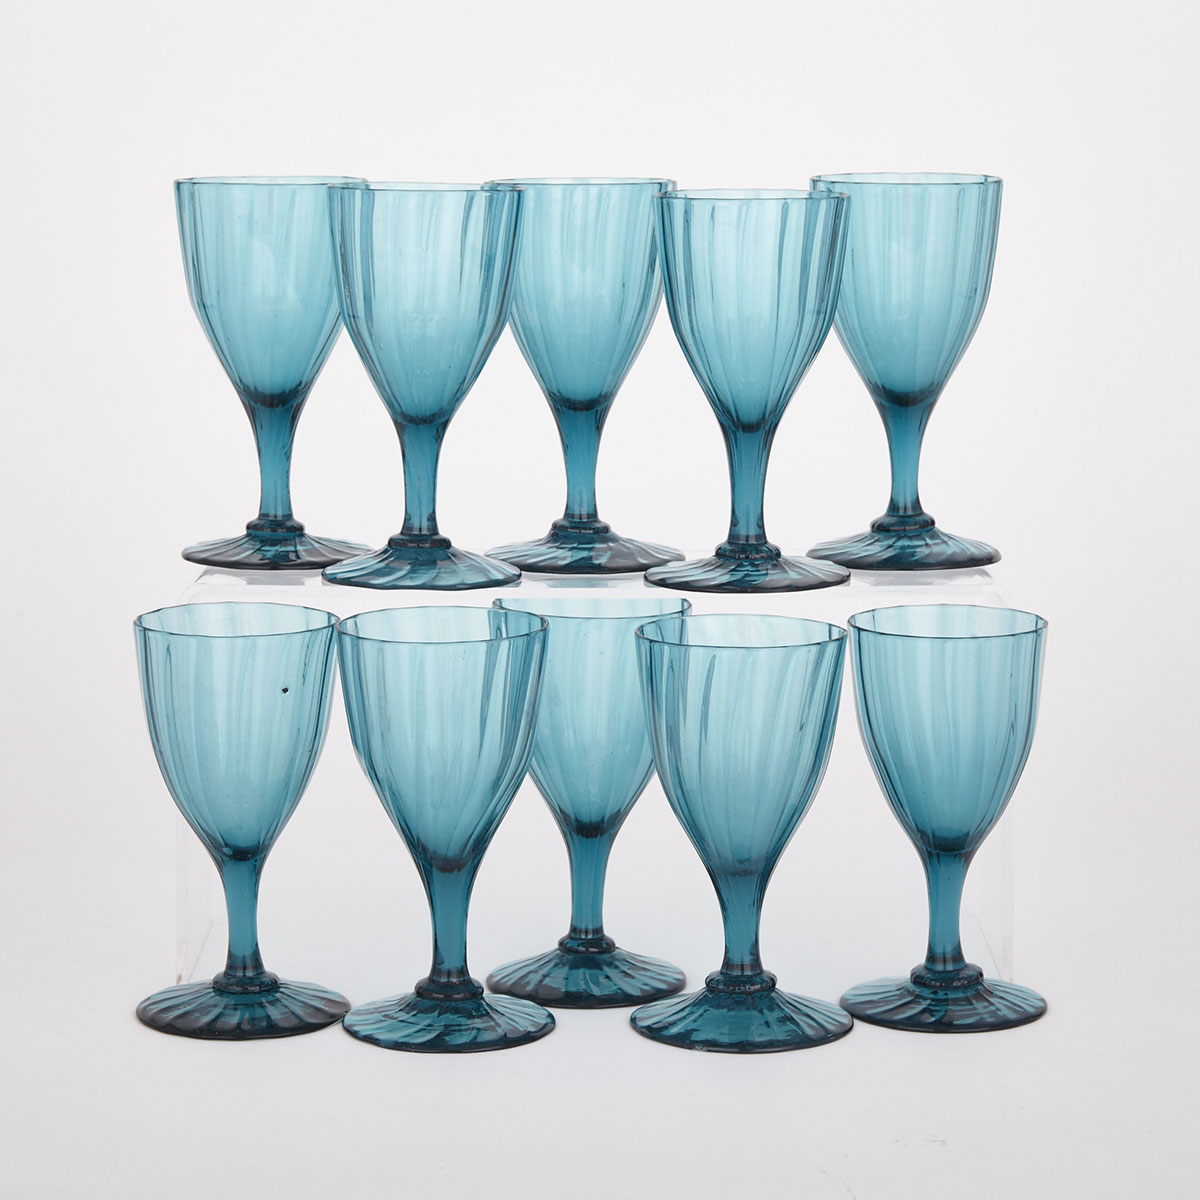 Ten Fluted Blue-Green Glass Wines, 19th century